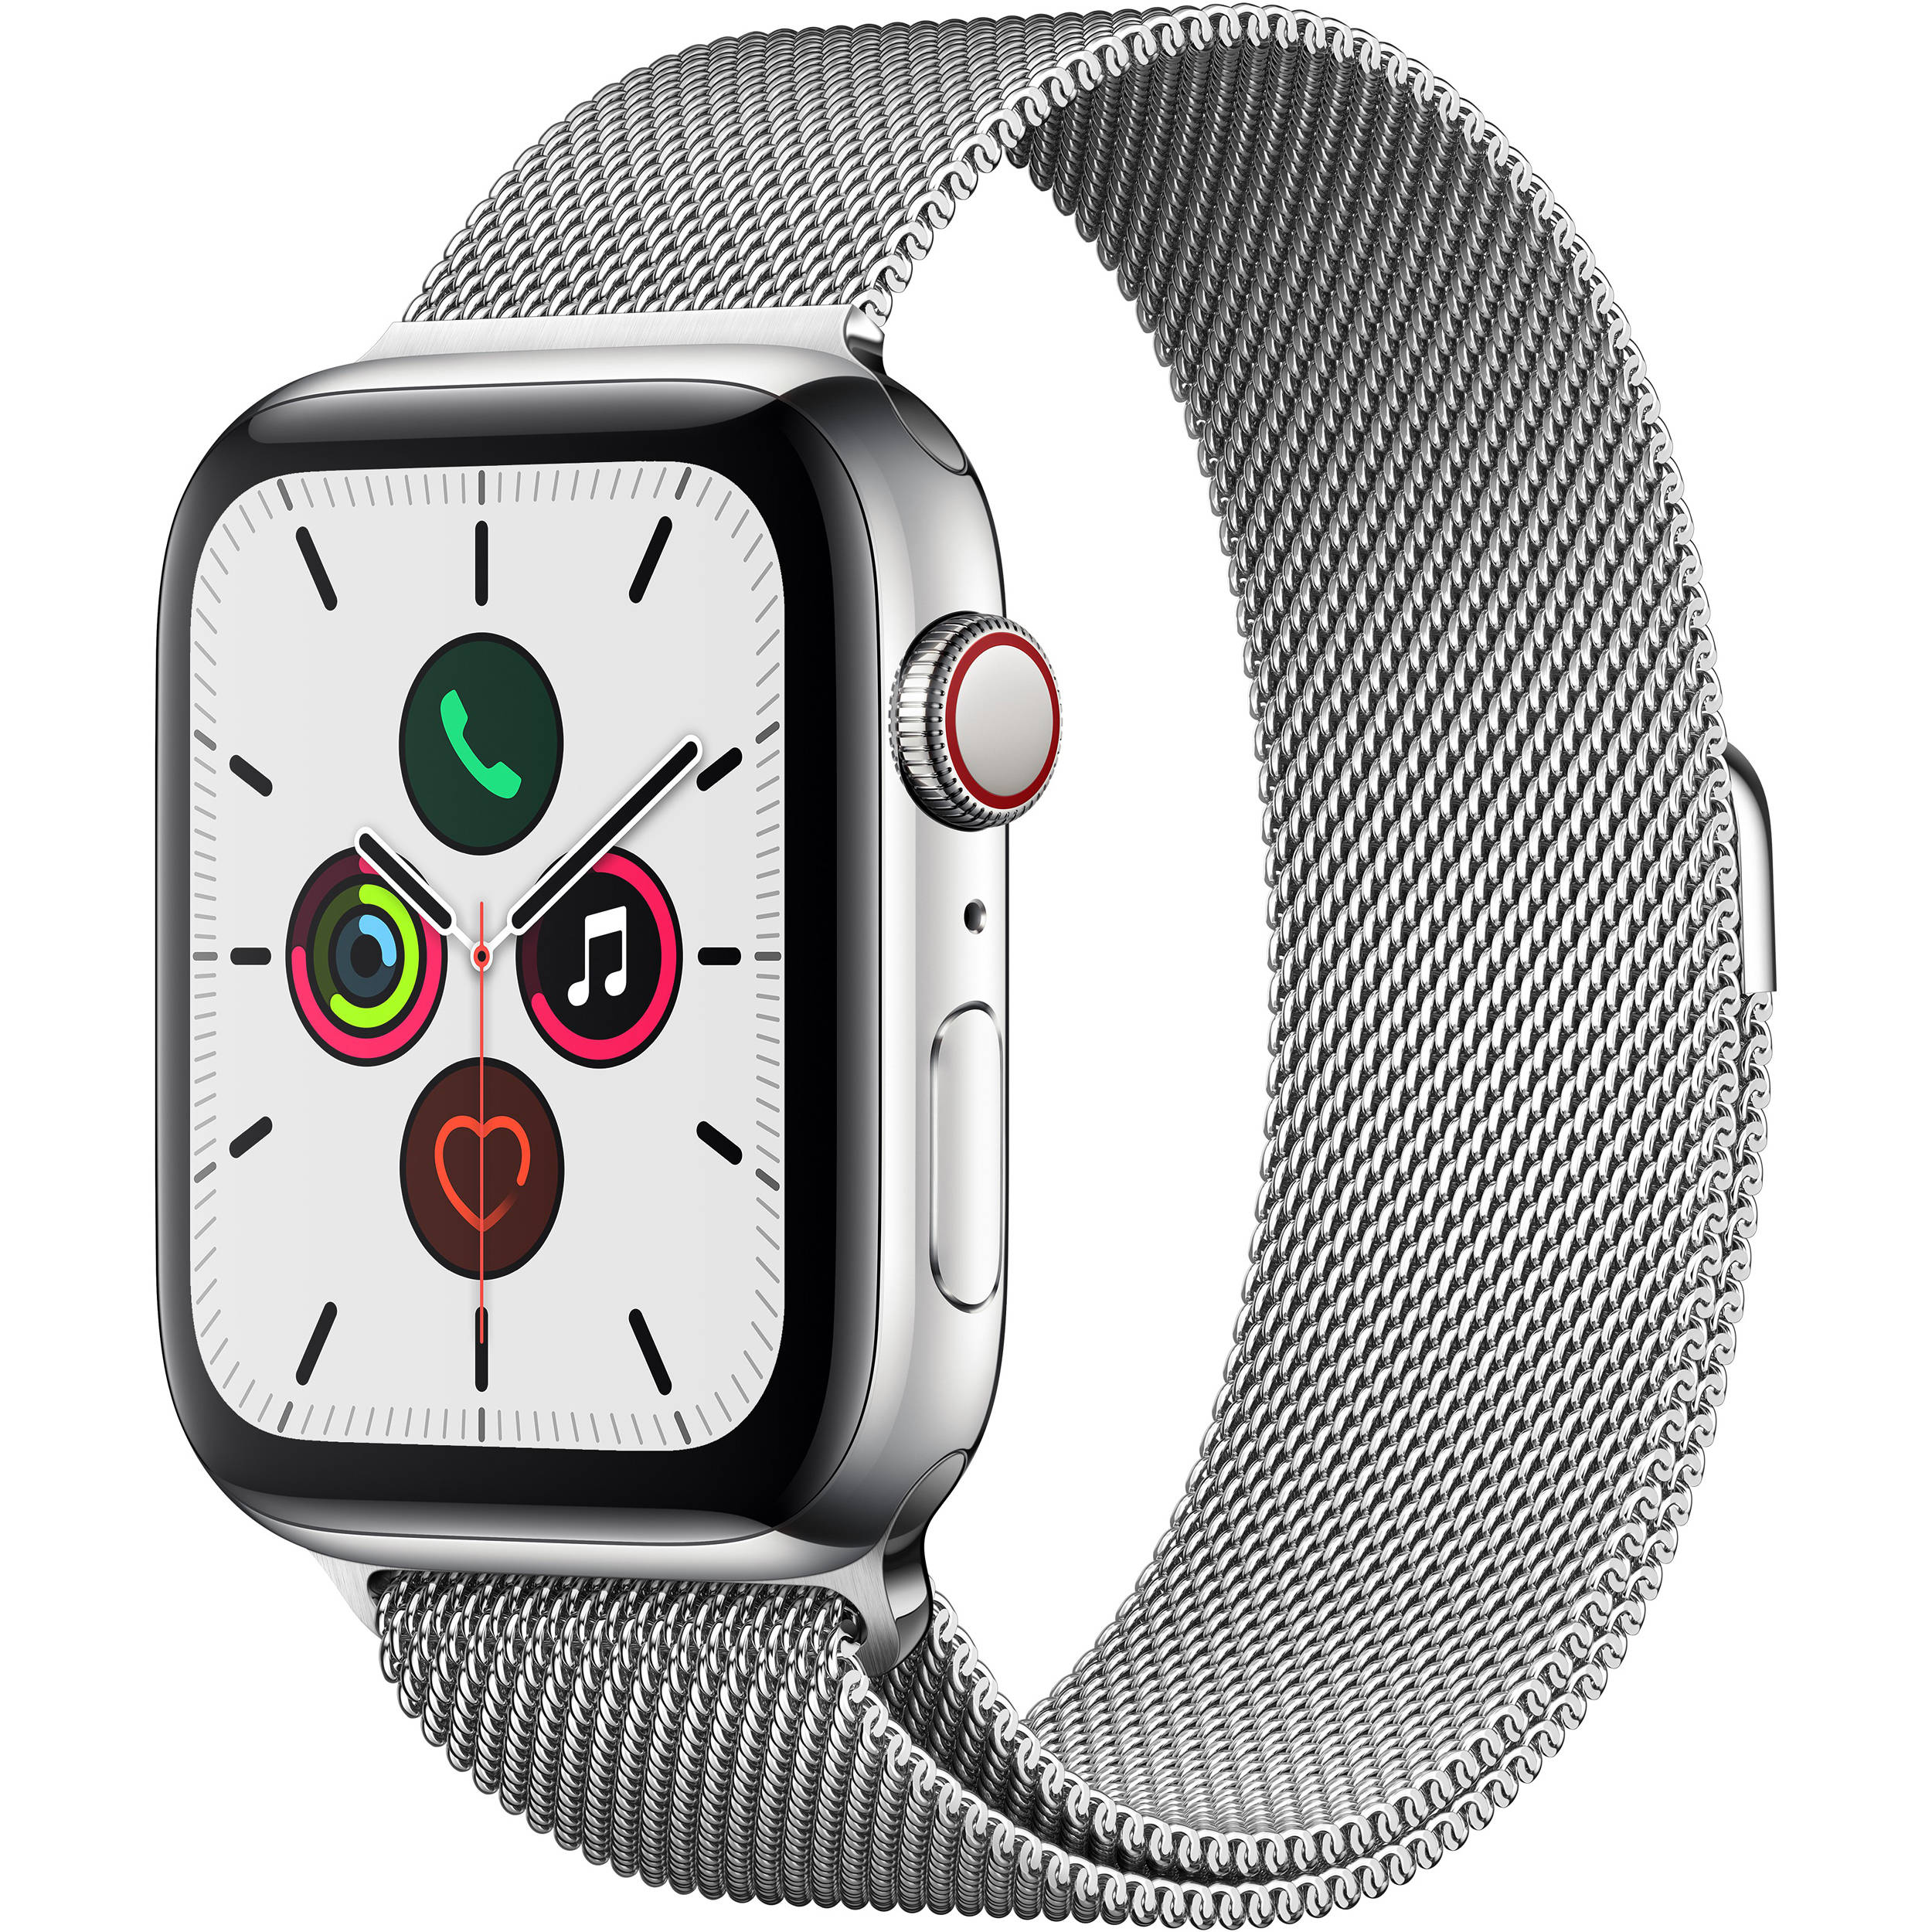 Apple Watch Series 5 Cellular Silver Stainless Steel 44mm Silver